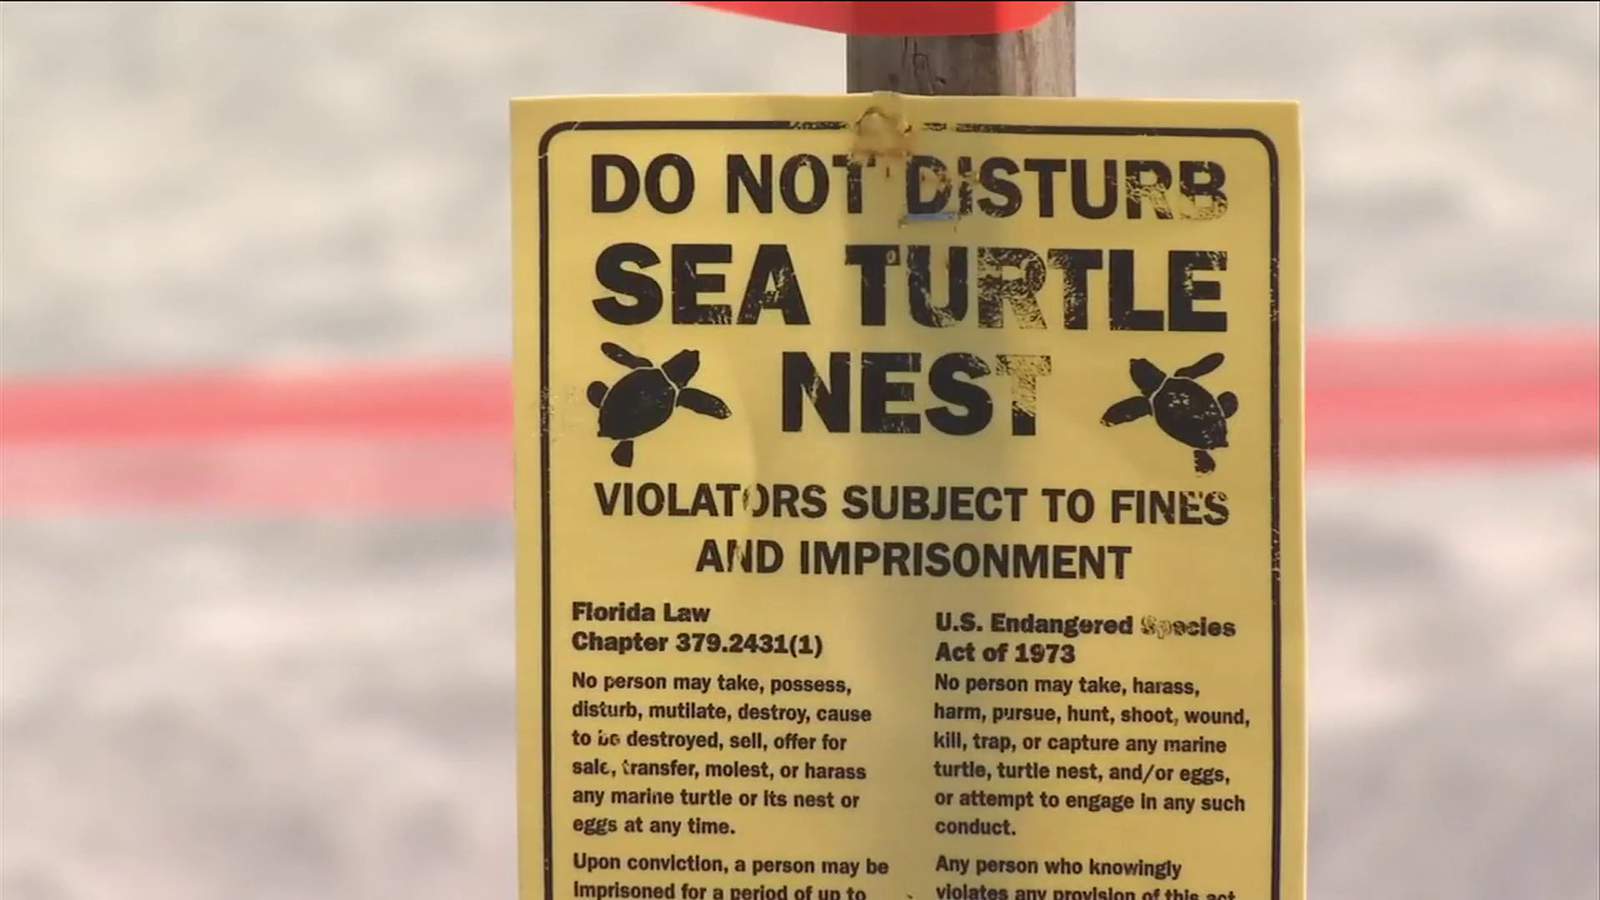 It’s sea turtle nesting season, so here’s how you can help